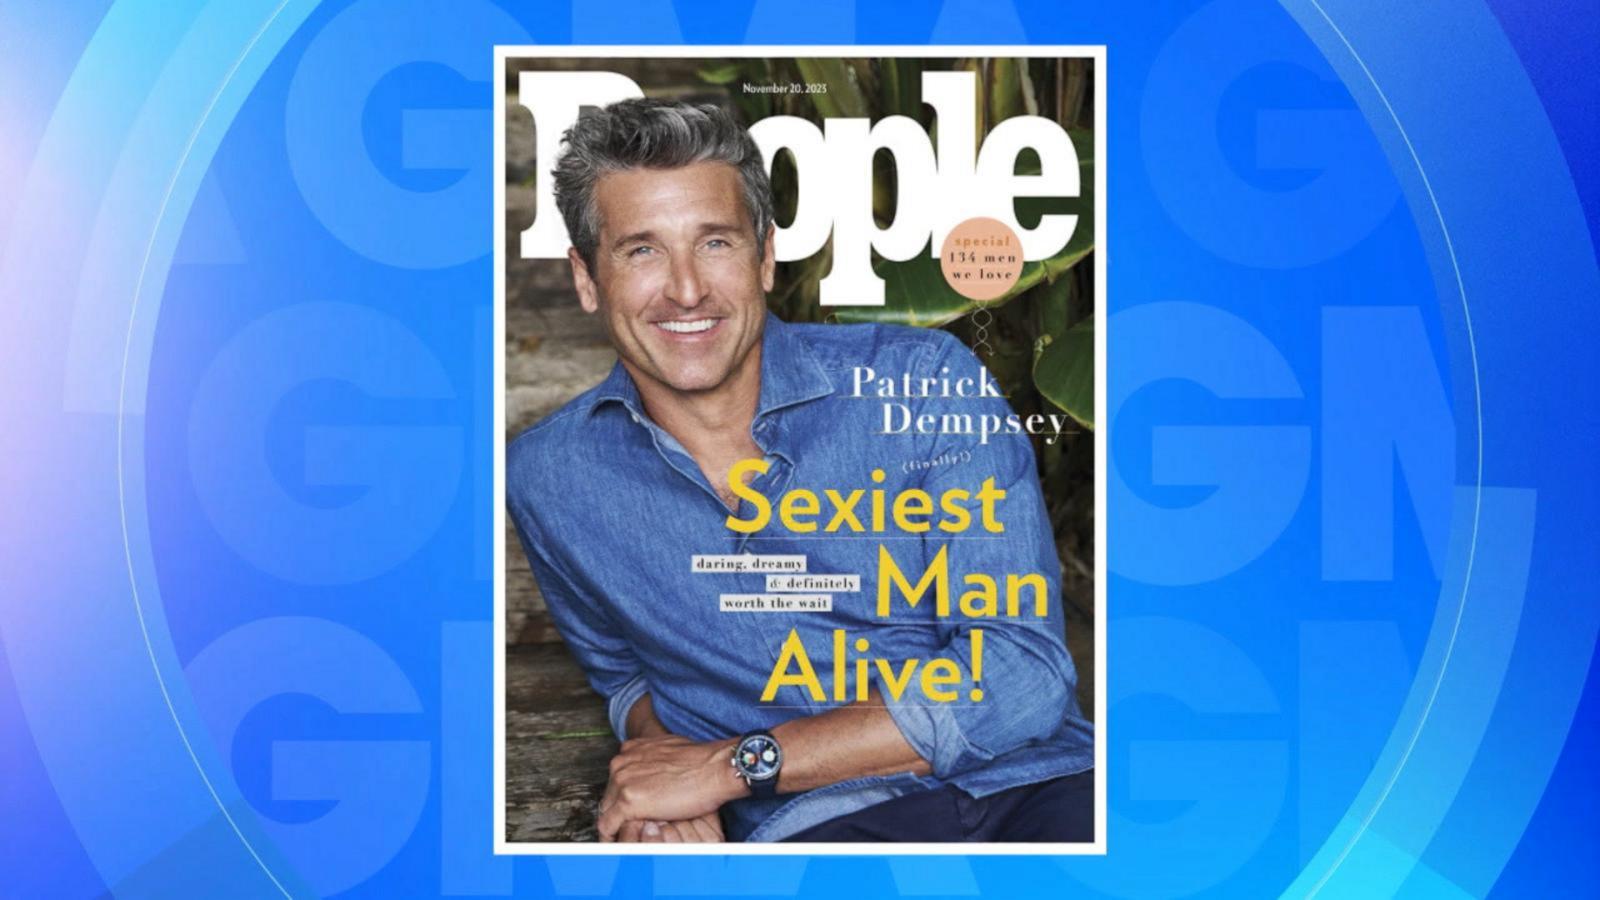 Patrick Dempsey named People's Sexiest Man Alive - Good Morning America